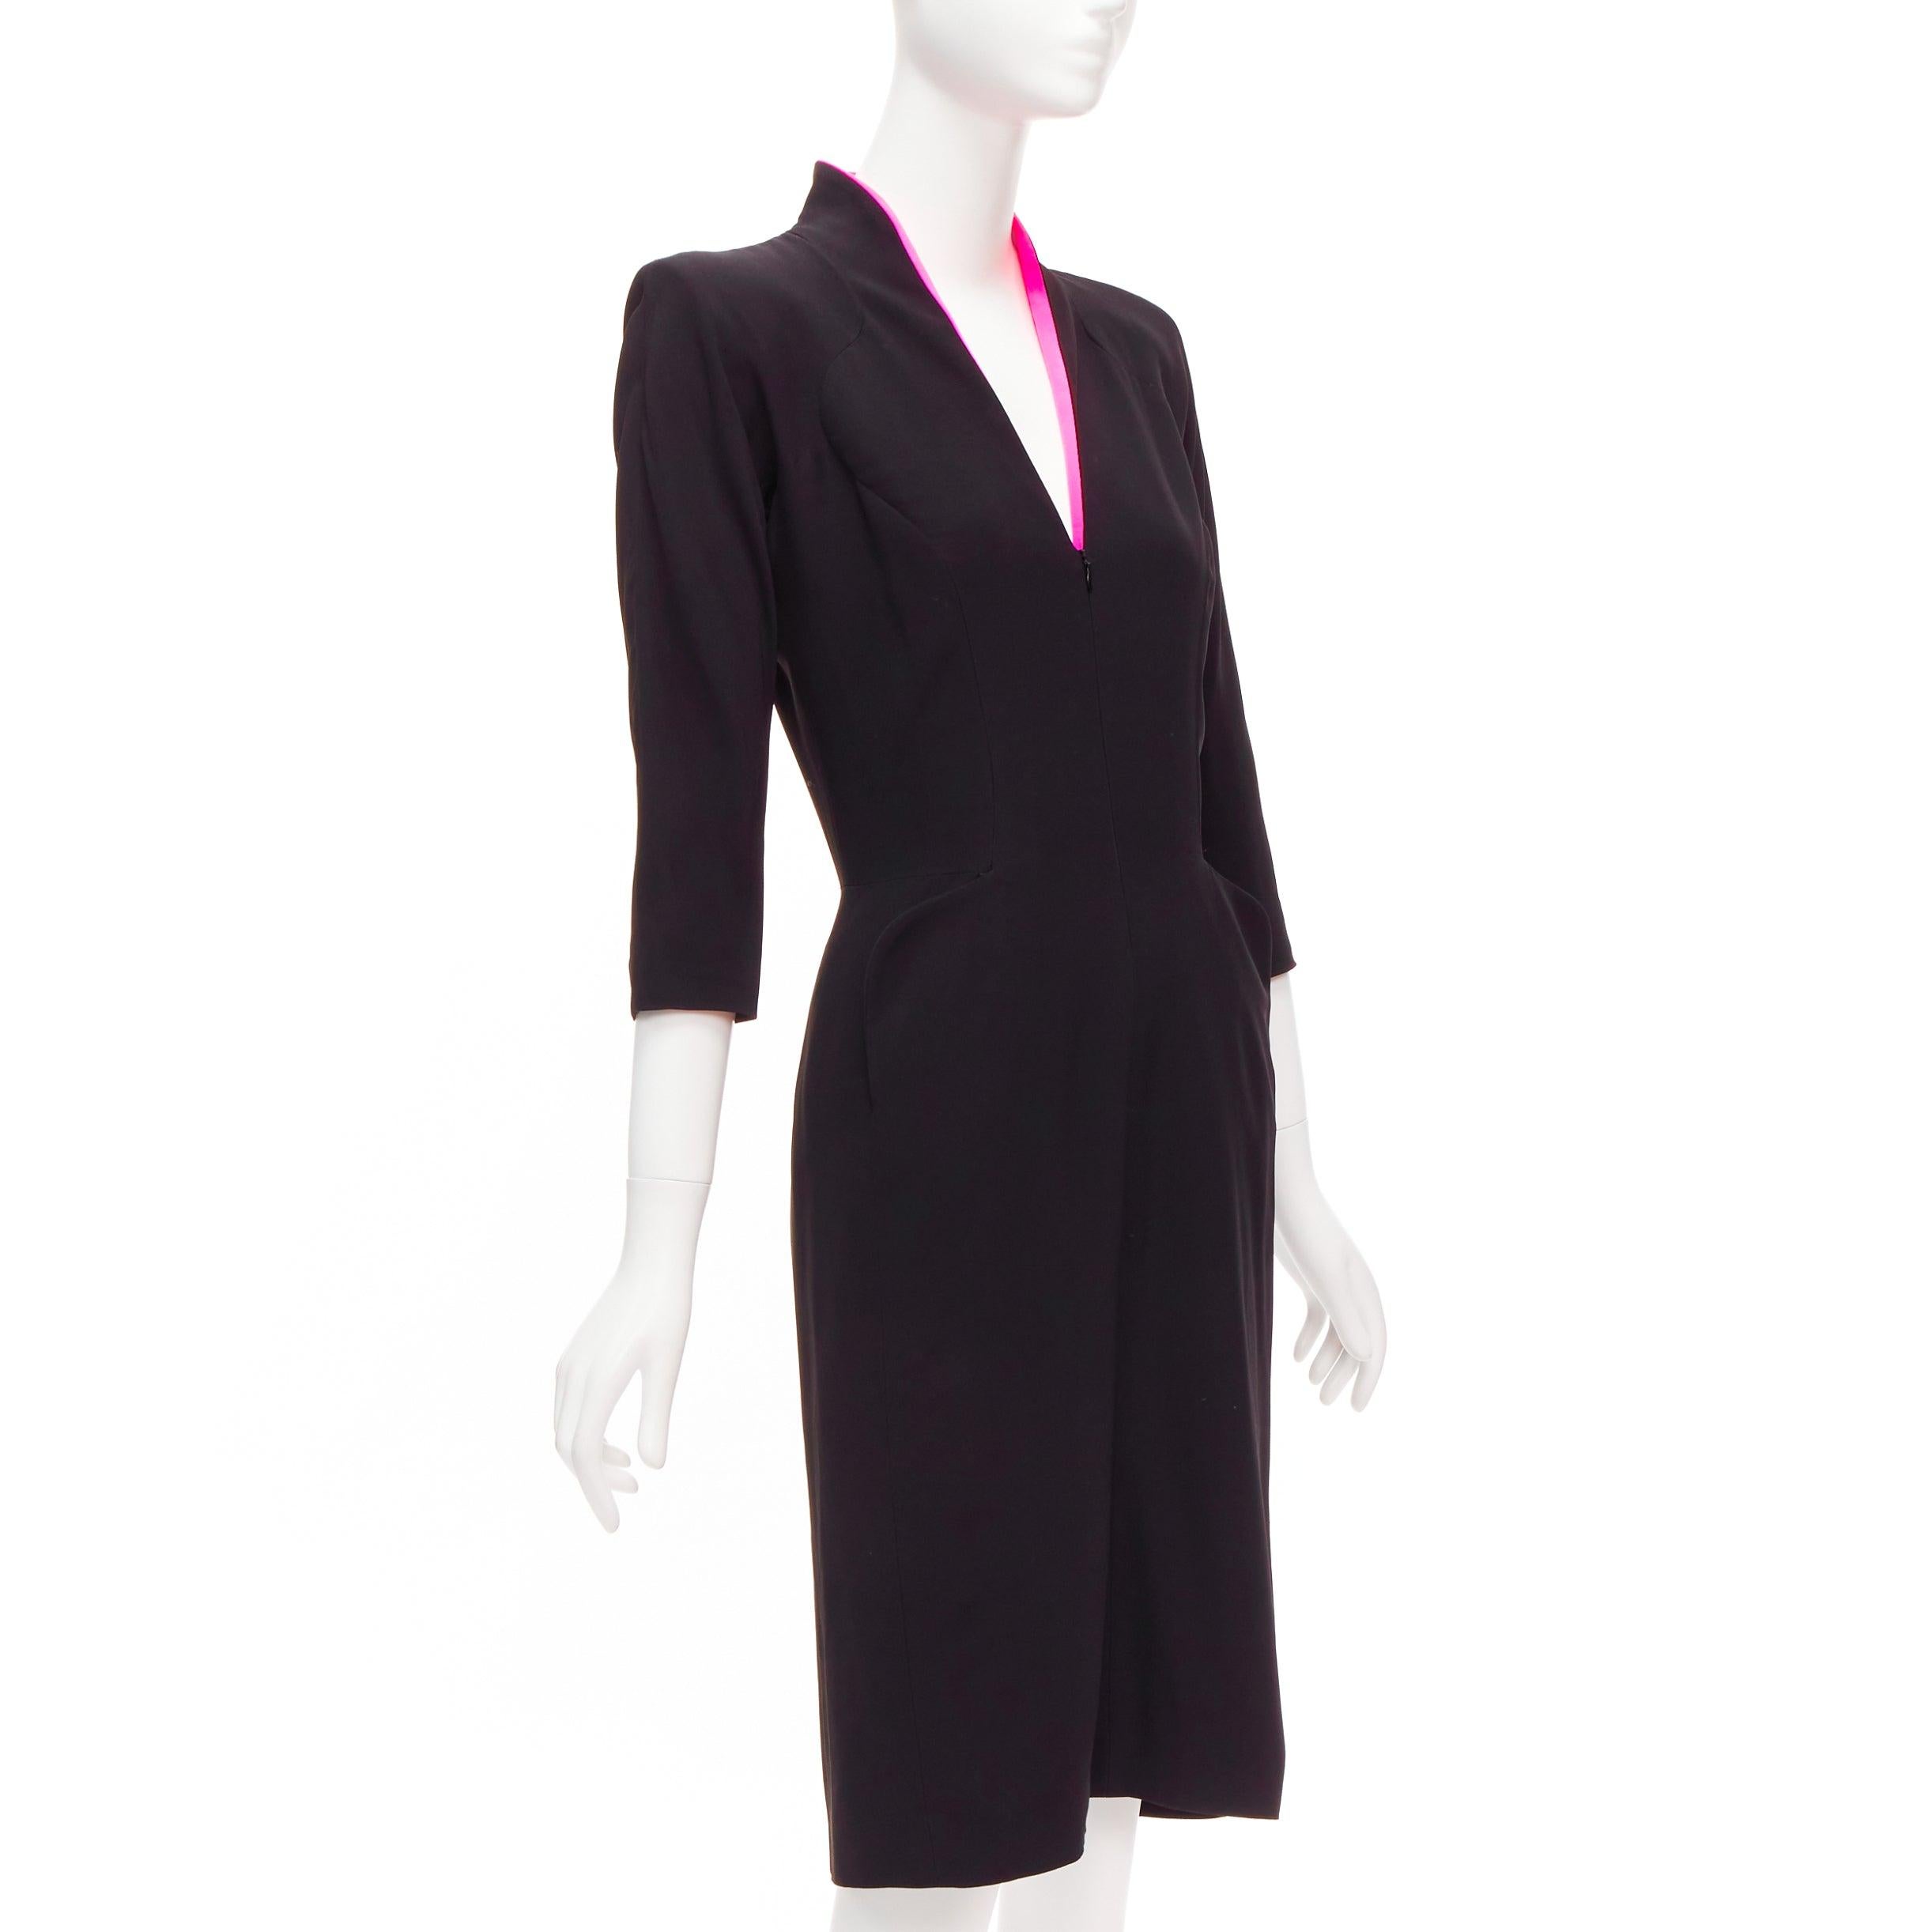 ALEXANDER MCQUEEN 2008 Vintage black pink lined collar curved pocket dress IT40
Reference: TGAS/D01005
Brand: Alexander McQueen
Designer: Lee Alexander McQueen
Collection: 2008 - Similar design on the Runway
Material: Silk, Viscose
Color: Black,